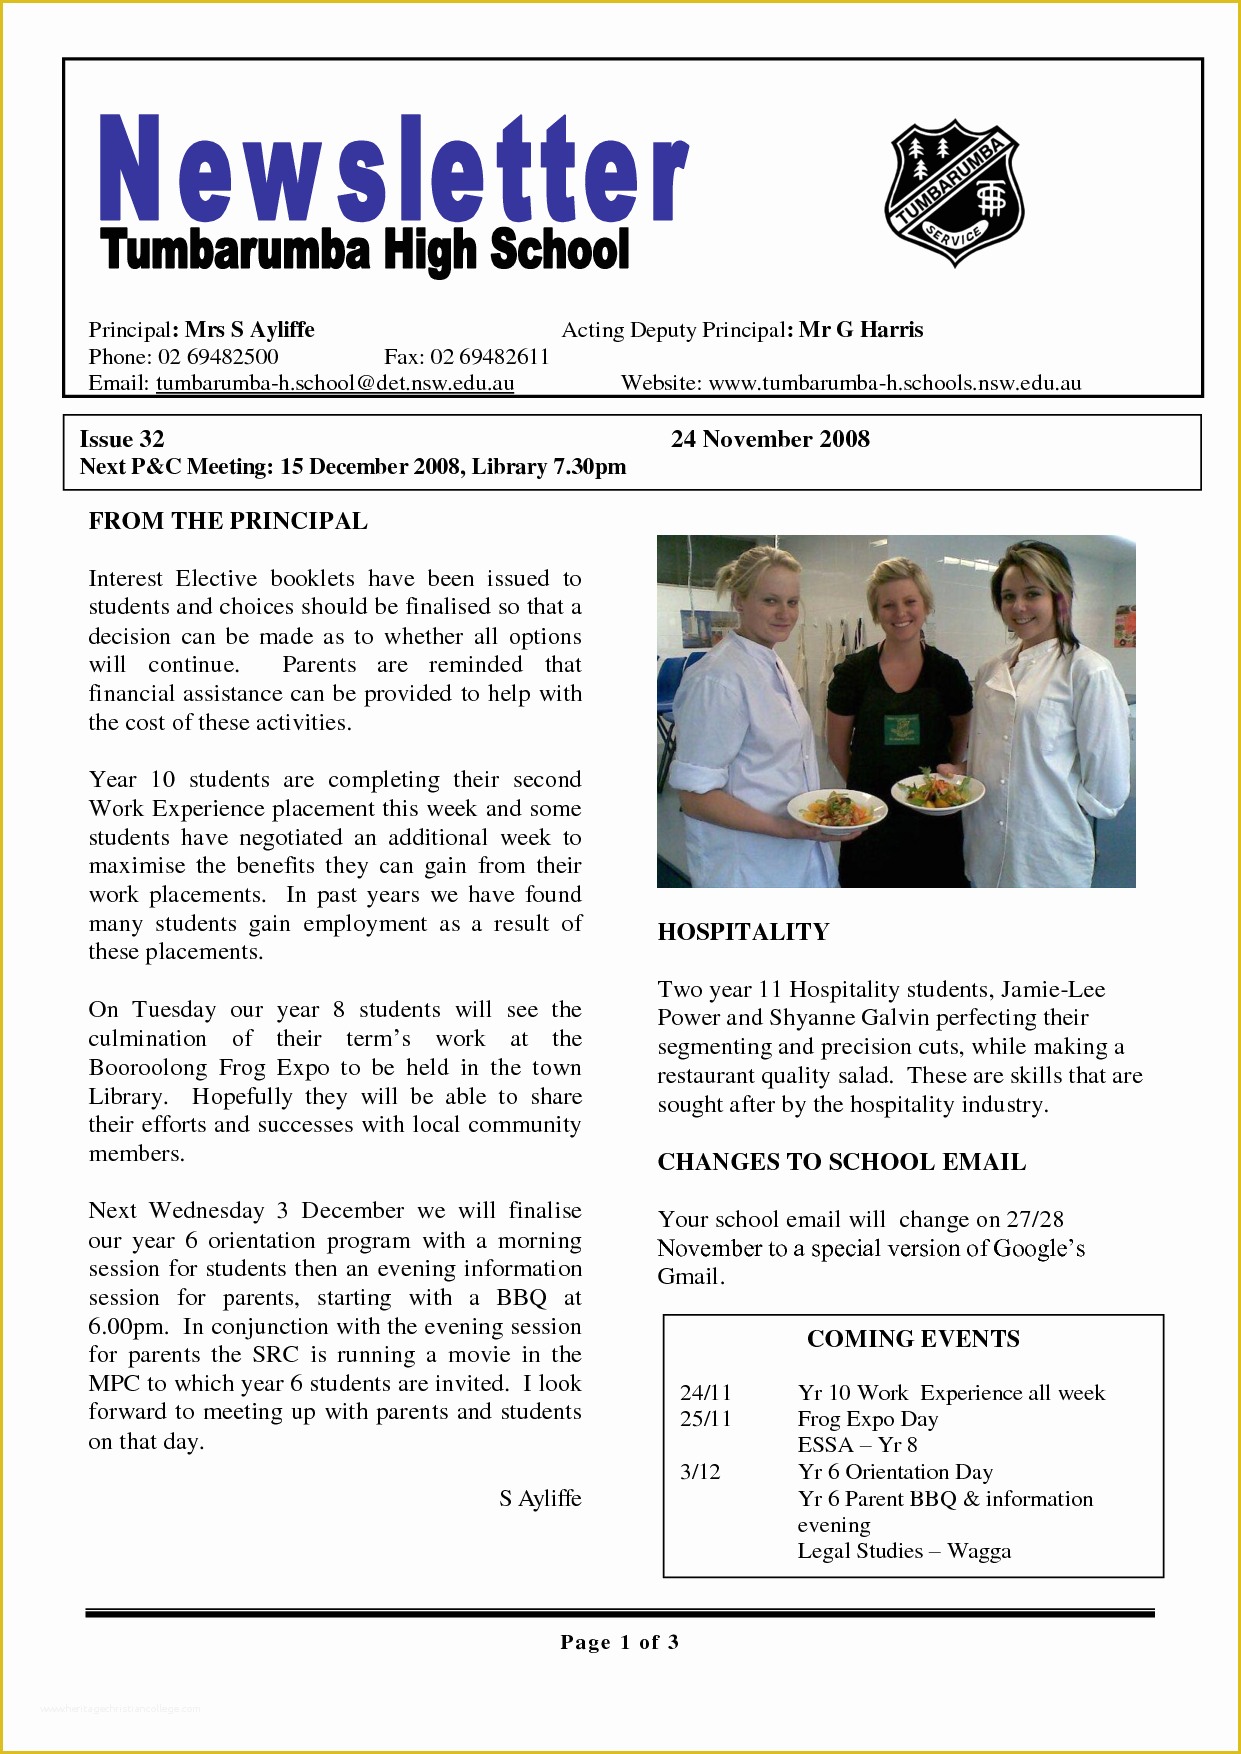 School Newsletter Templates Free Of 17 Awesome High School Newsletter Templates Images